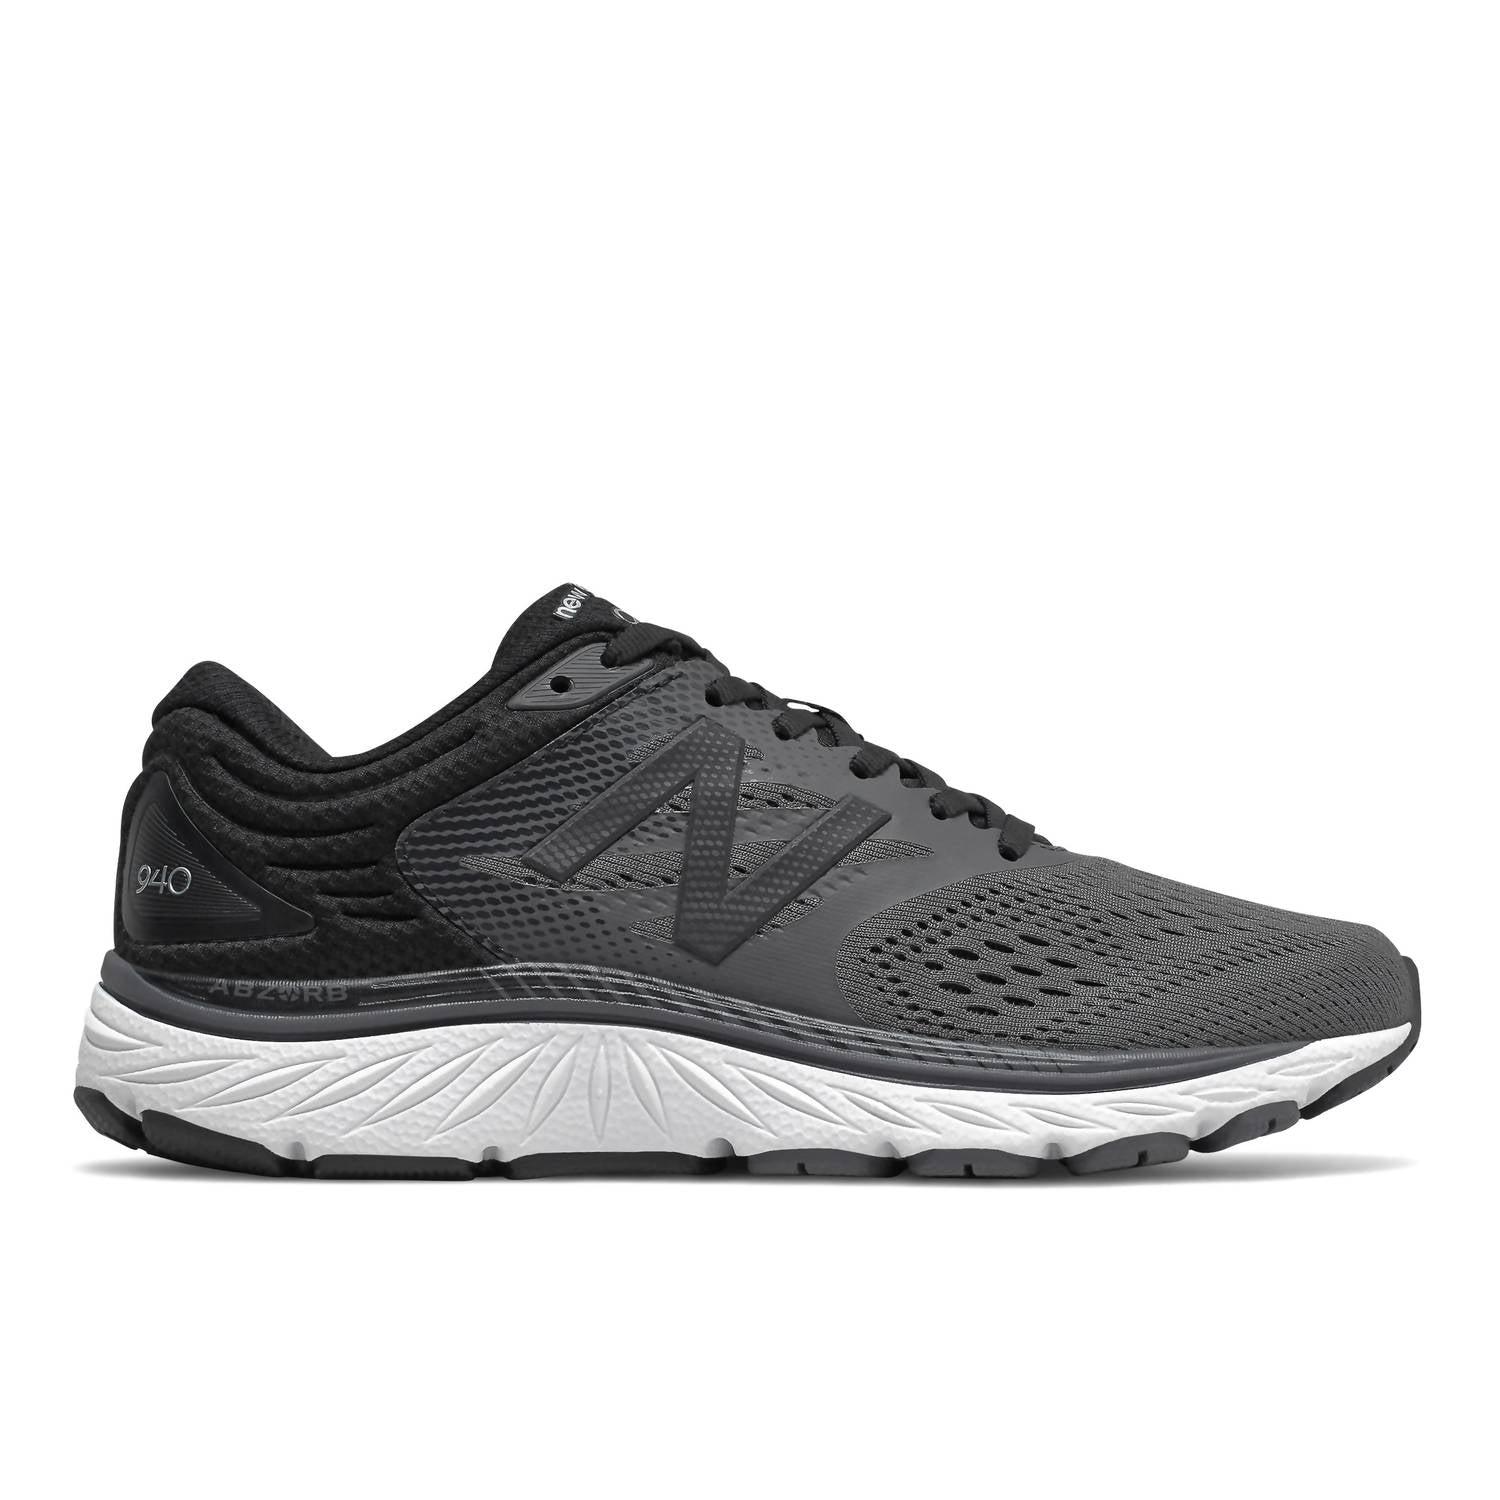 New Balance 's W940gk4 Running Shoes in Black | Lyst